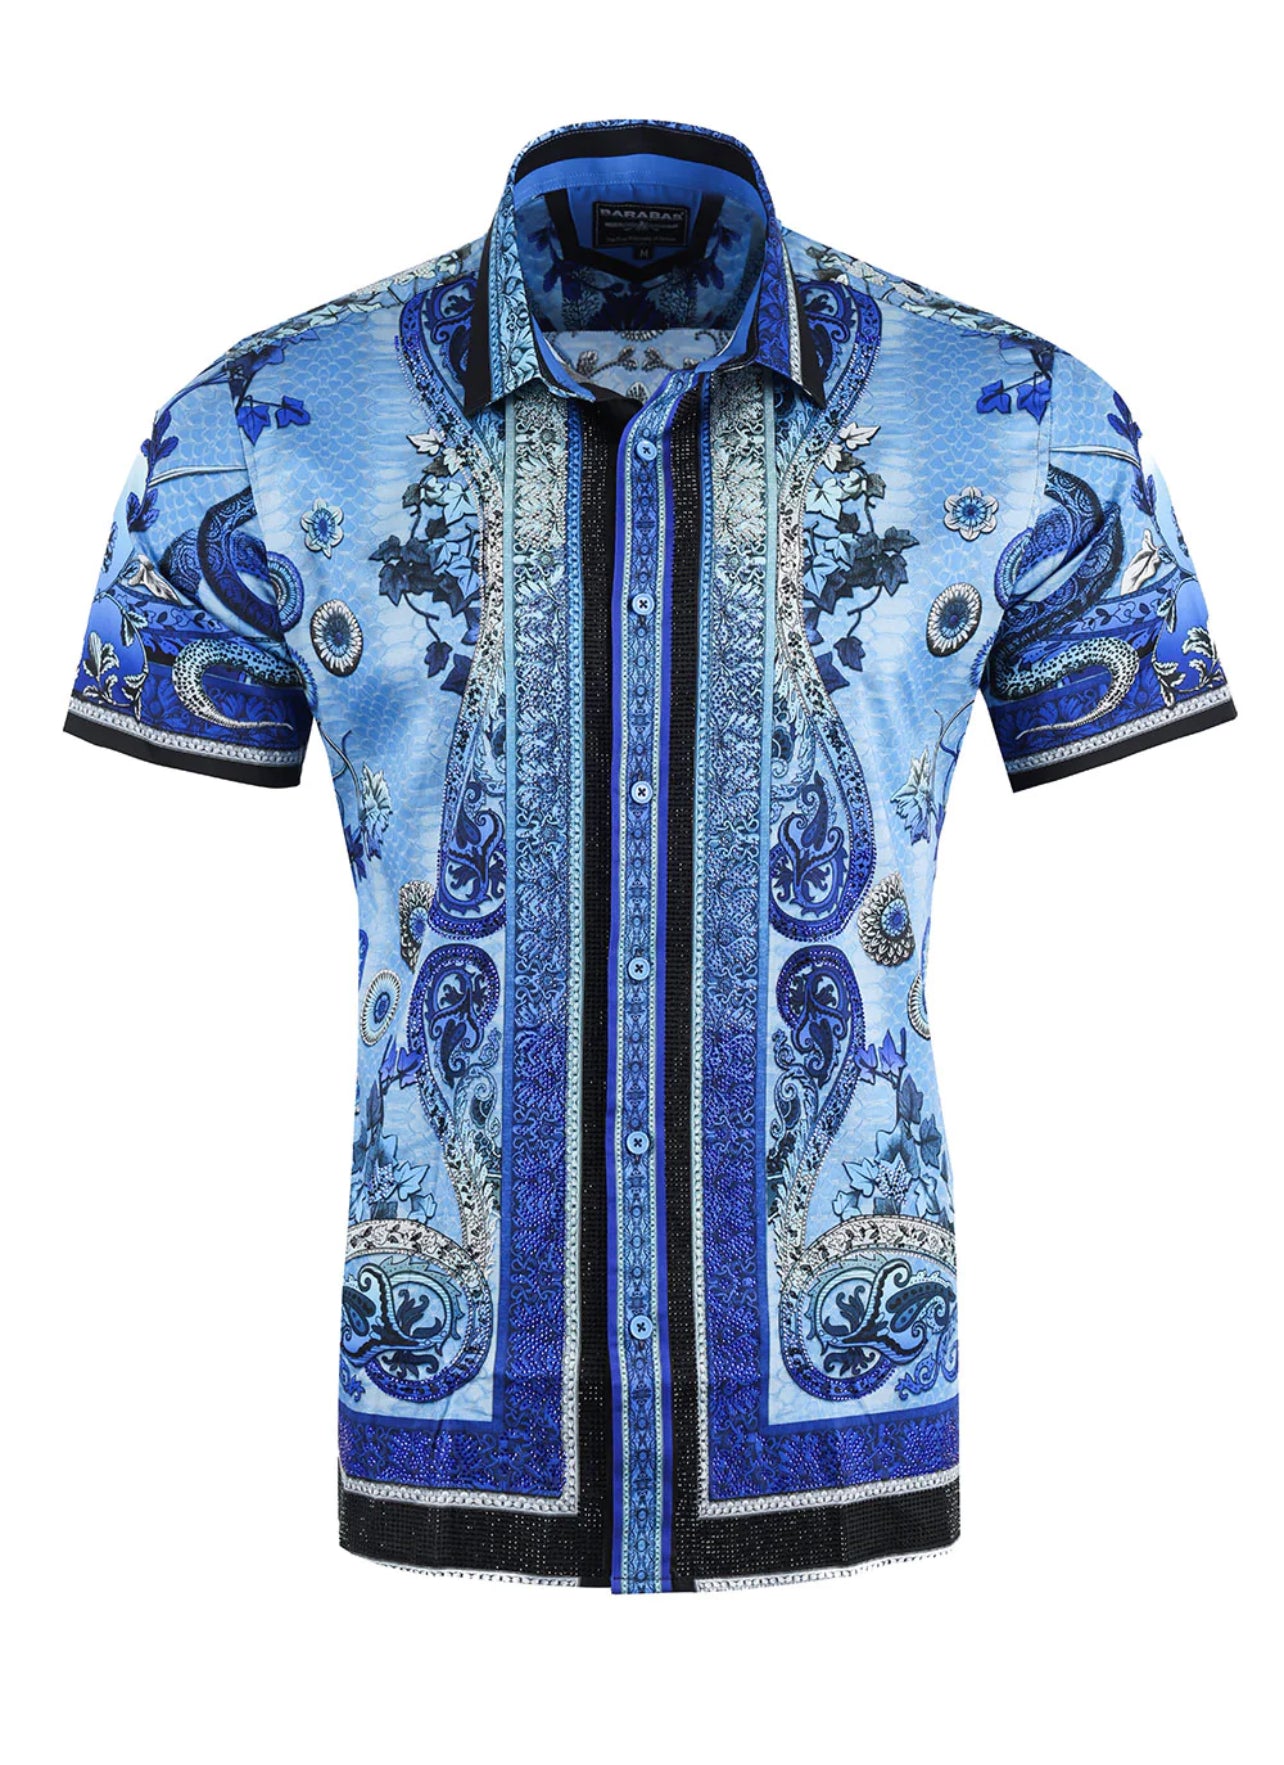 Barbas Exquisite Peacock Feather Shirt